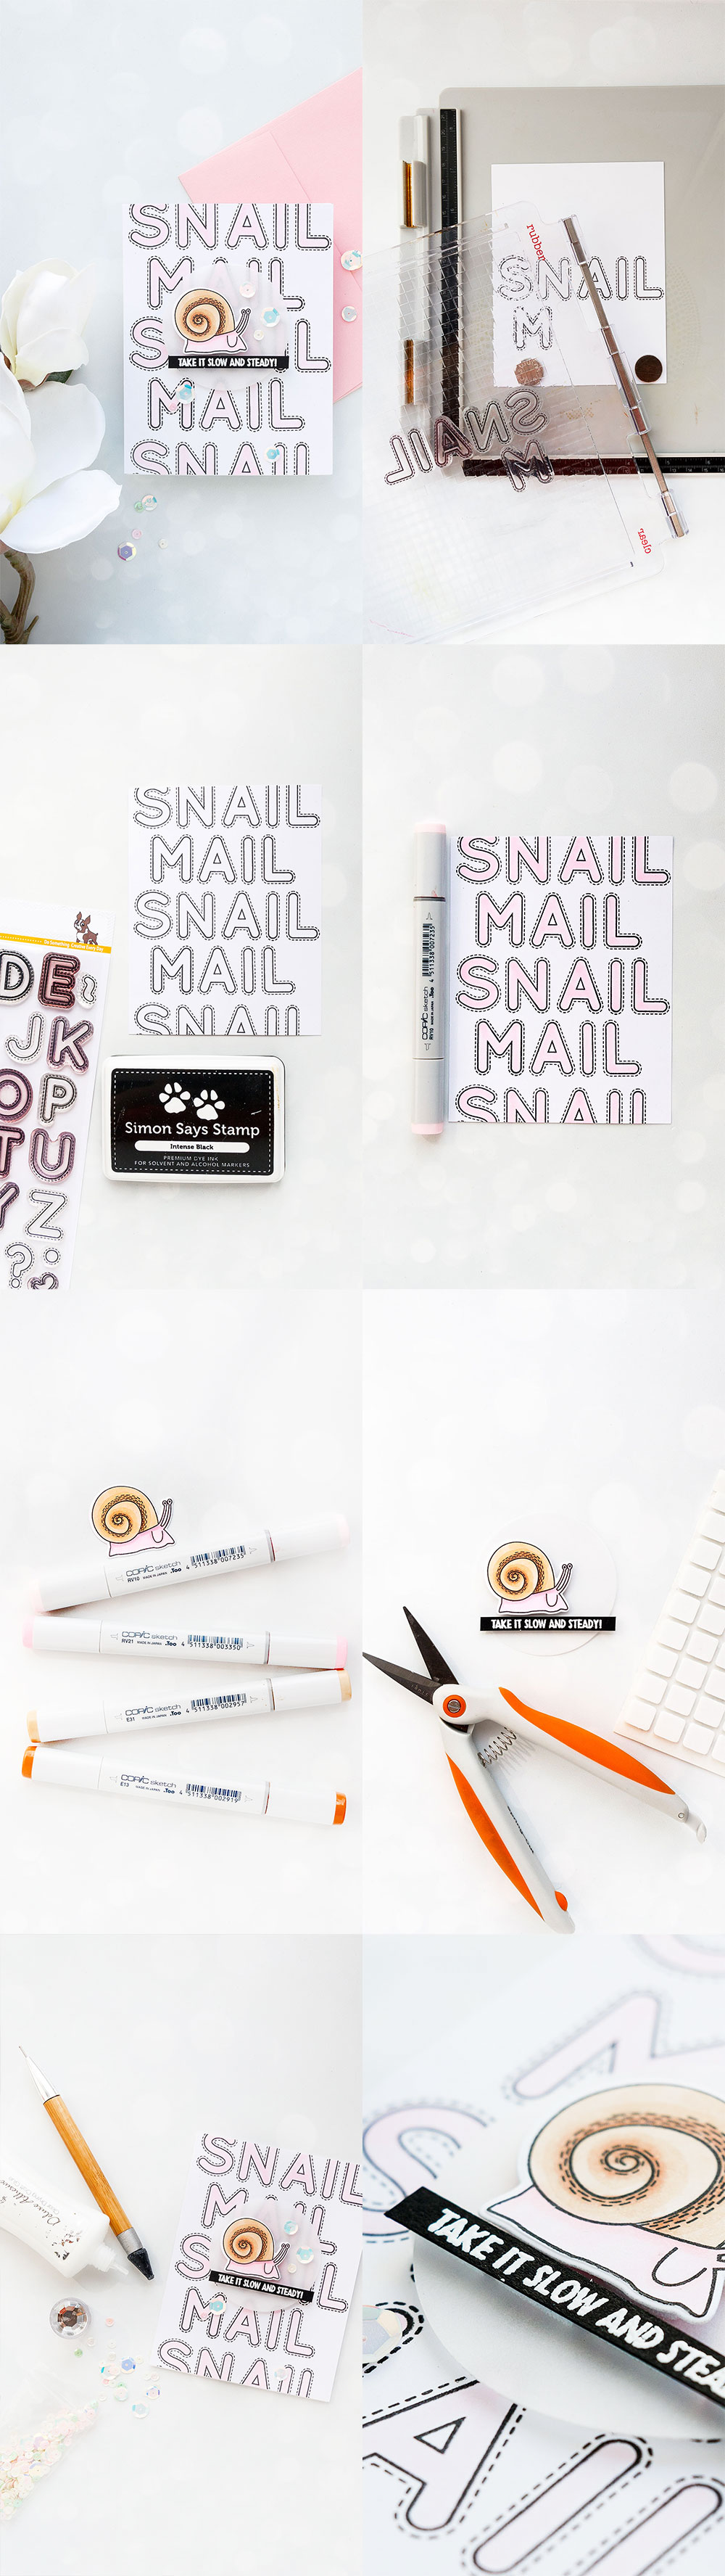 Simon Says Stamp | Snail Mail Card by Yana Smakula using Under The Sea Animals set #stamping #sssflutteringby #simonsaysstamp #cardmaking #handmadecard